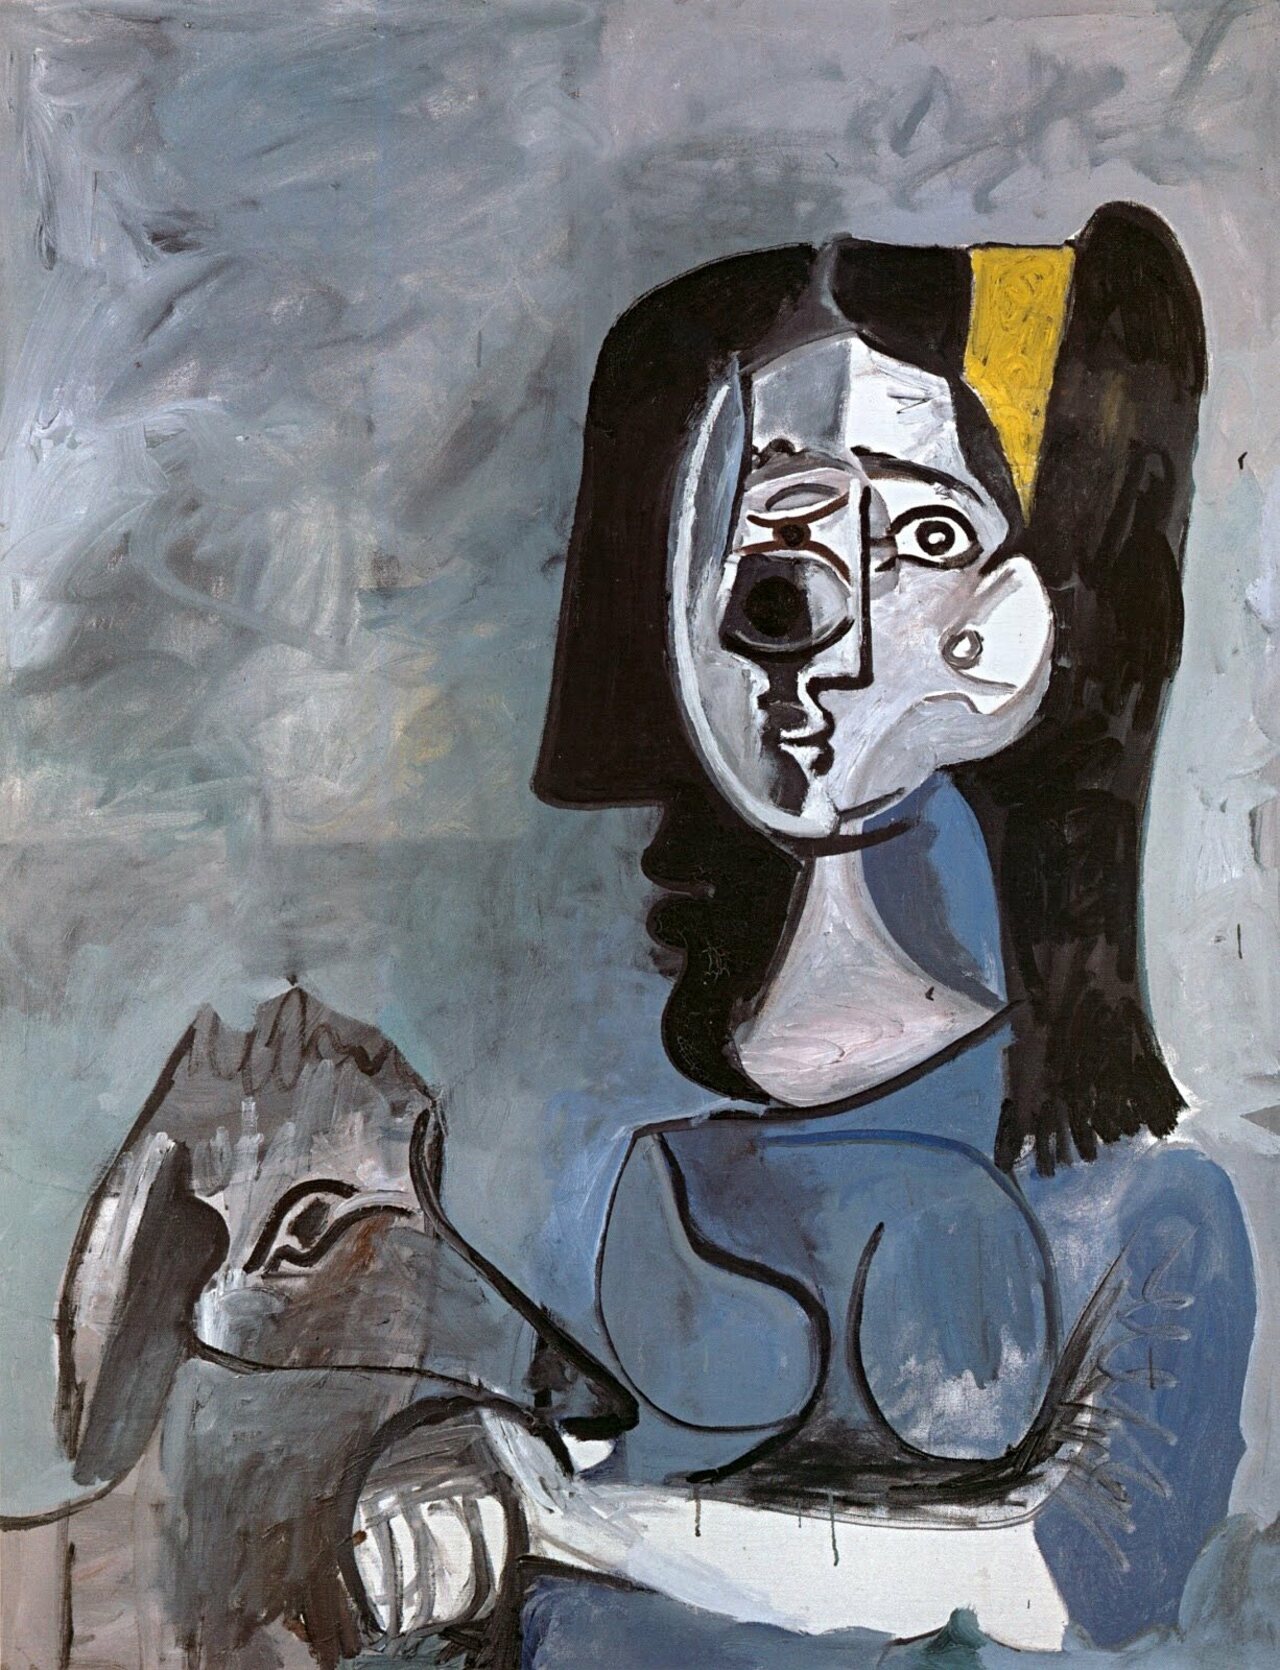 RT @rabihalameddine: Pablo Picasso - Jacqueline with Her Afghan Dog, Kabul - 1962 https://t.co/YQ6MNBkCmc